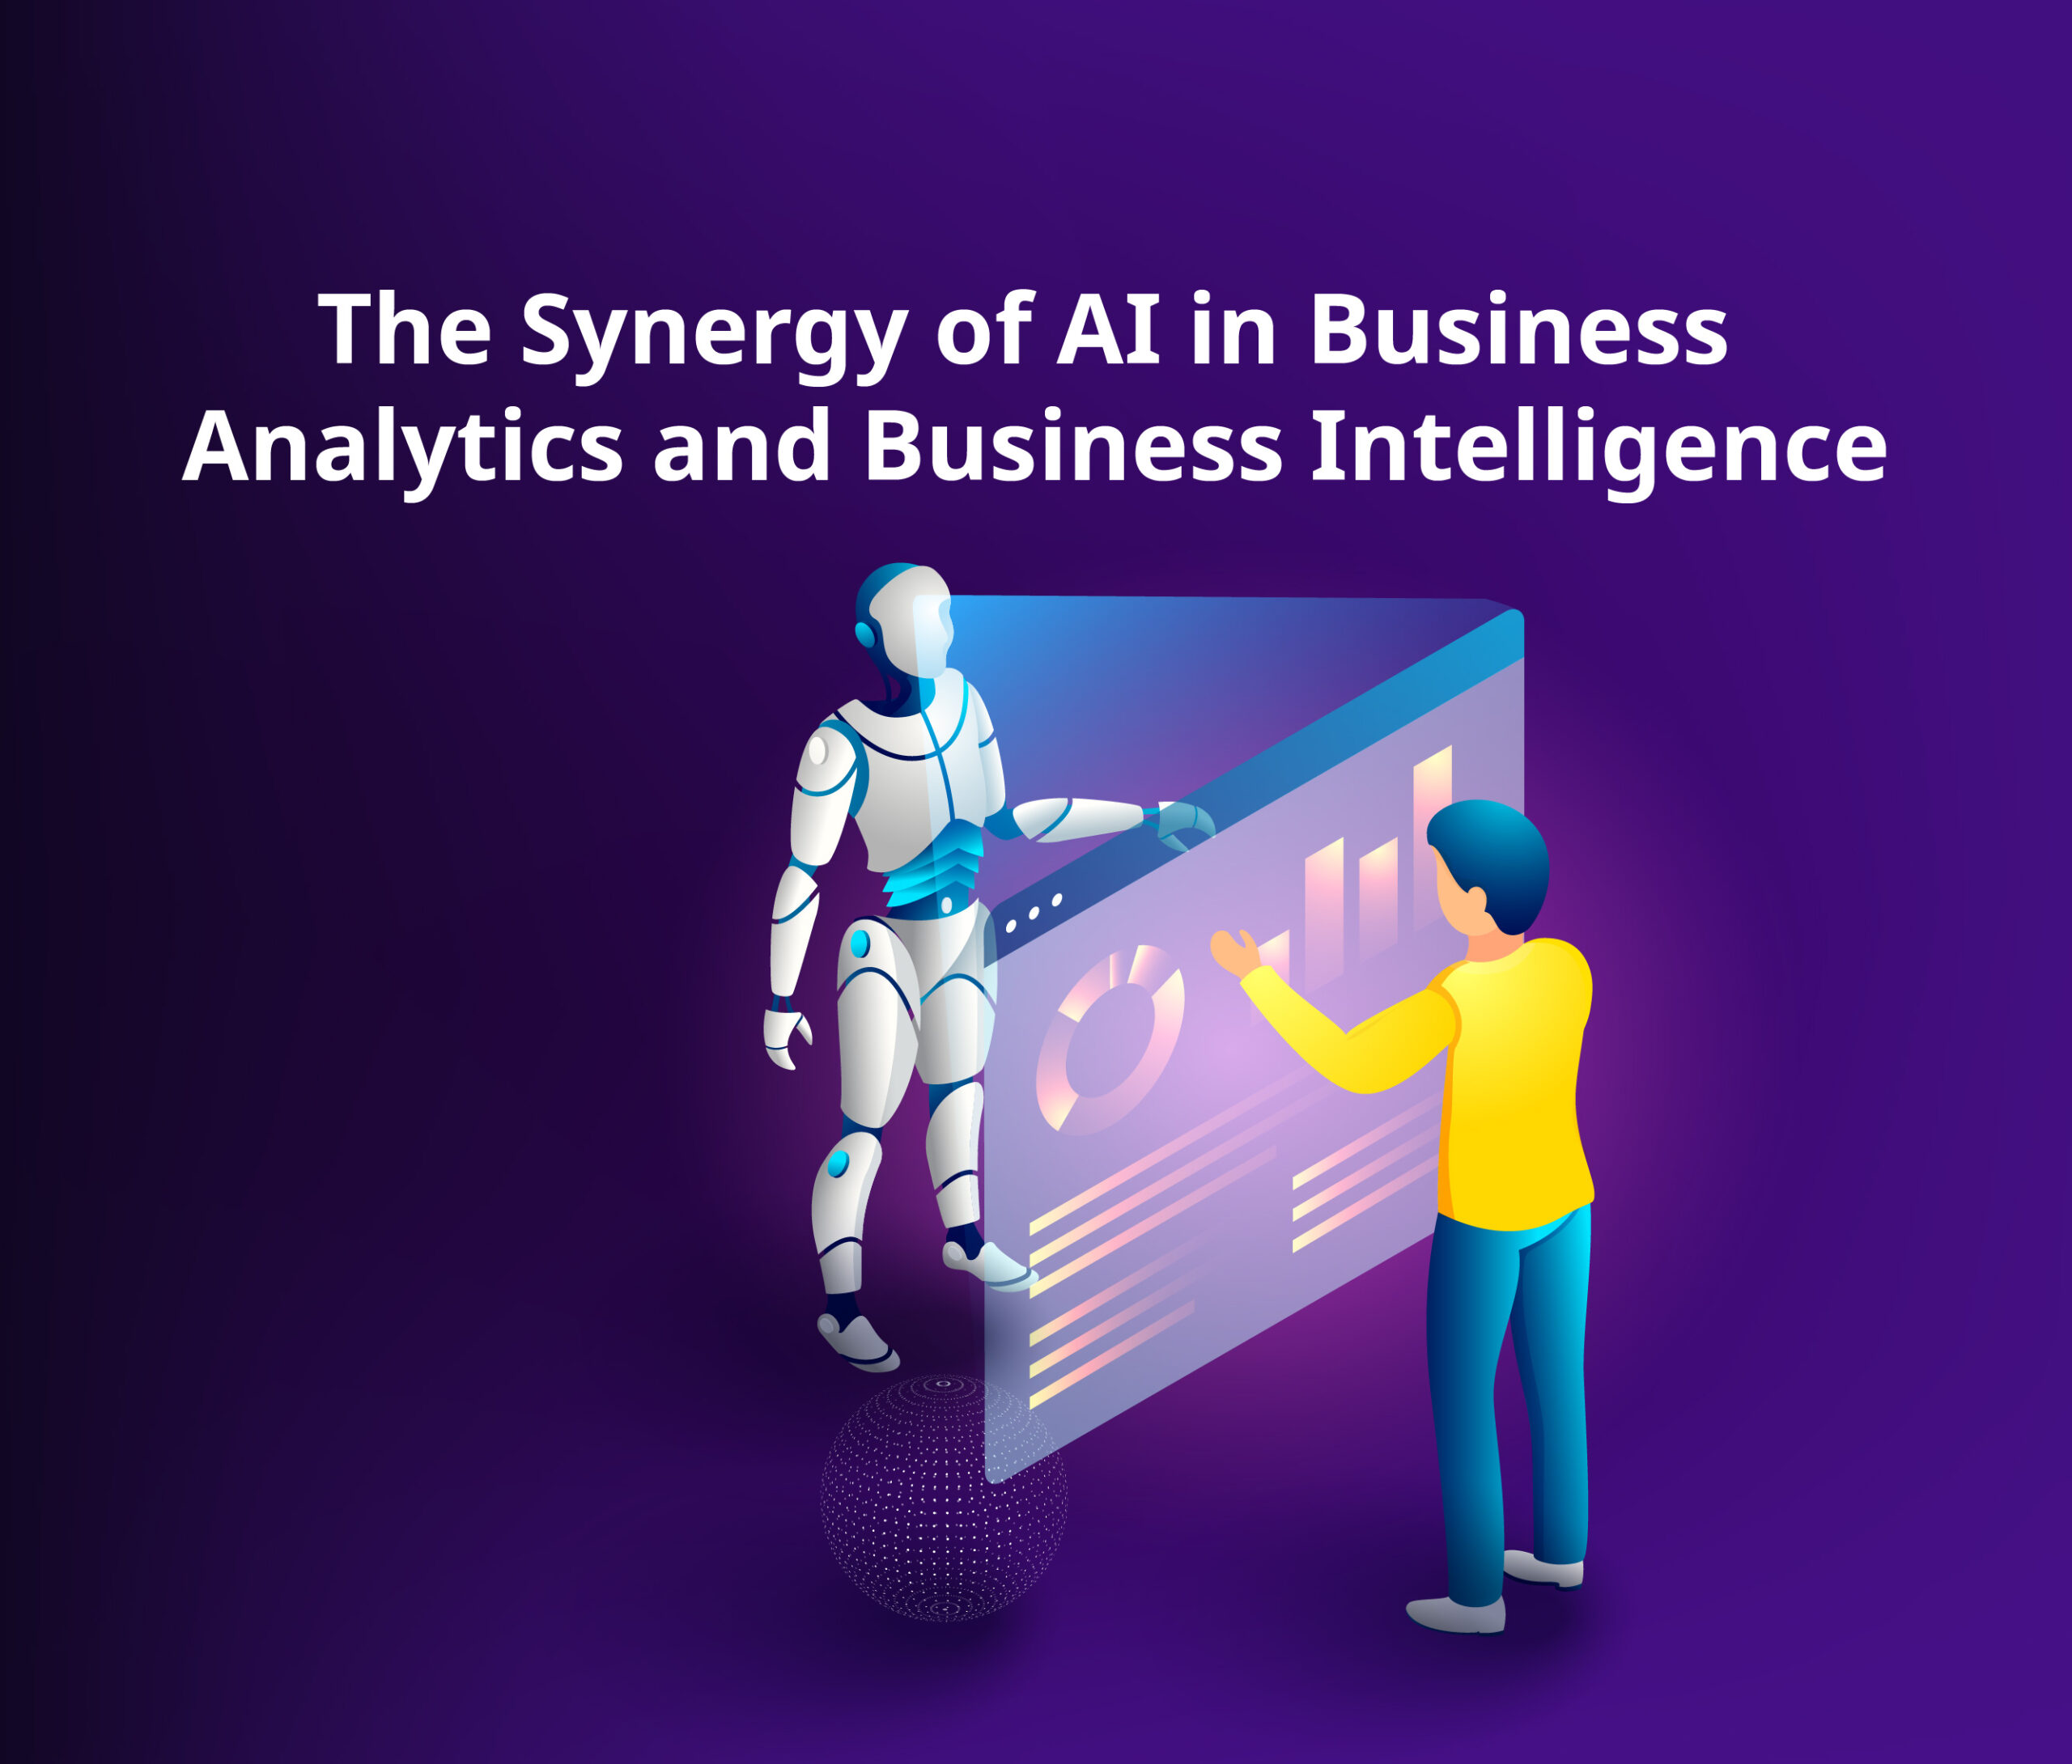 AI in Business Analytics